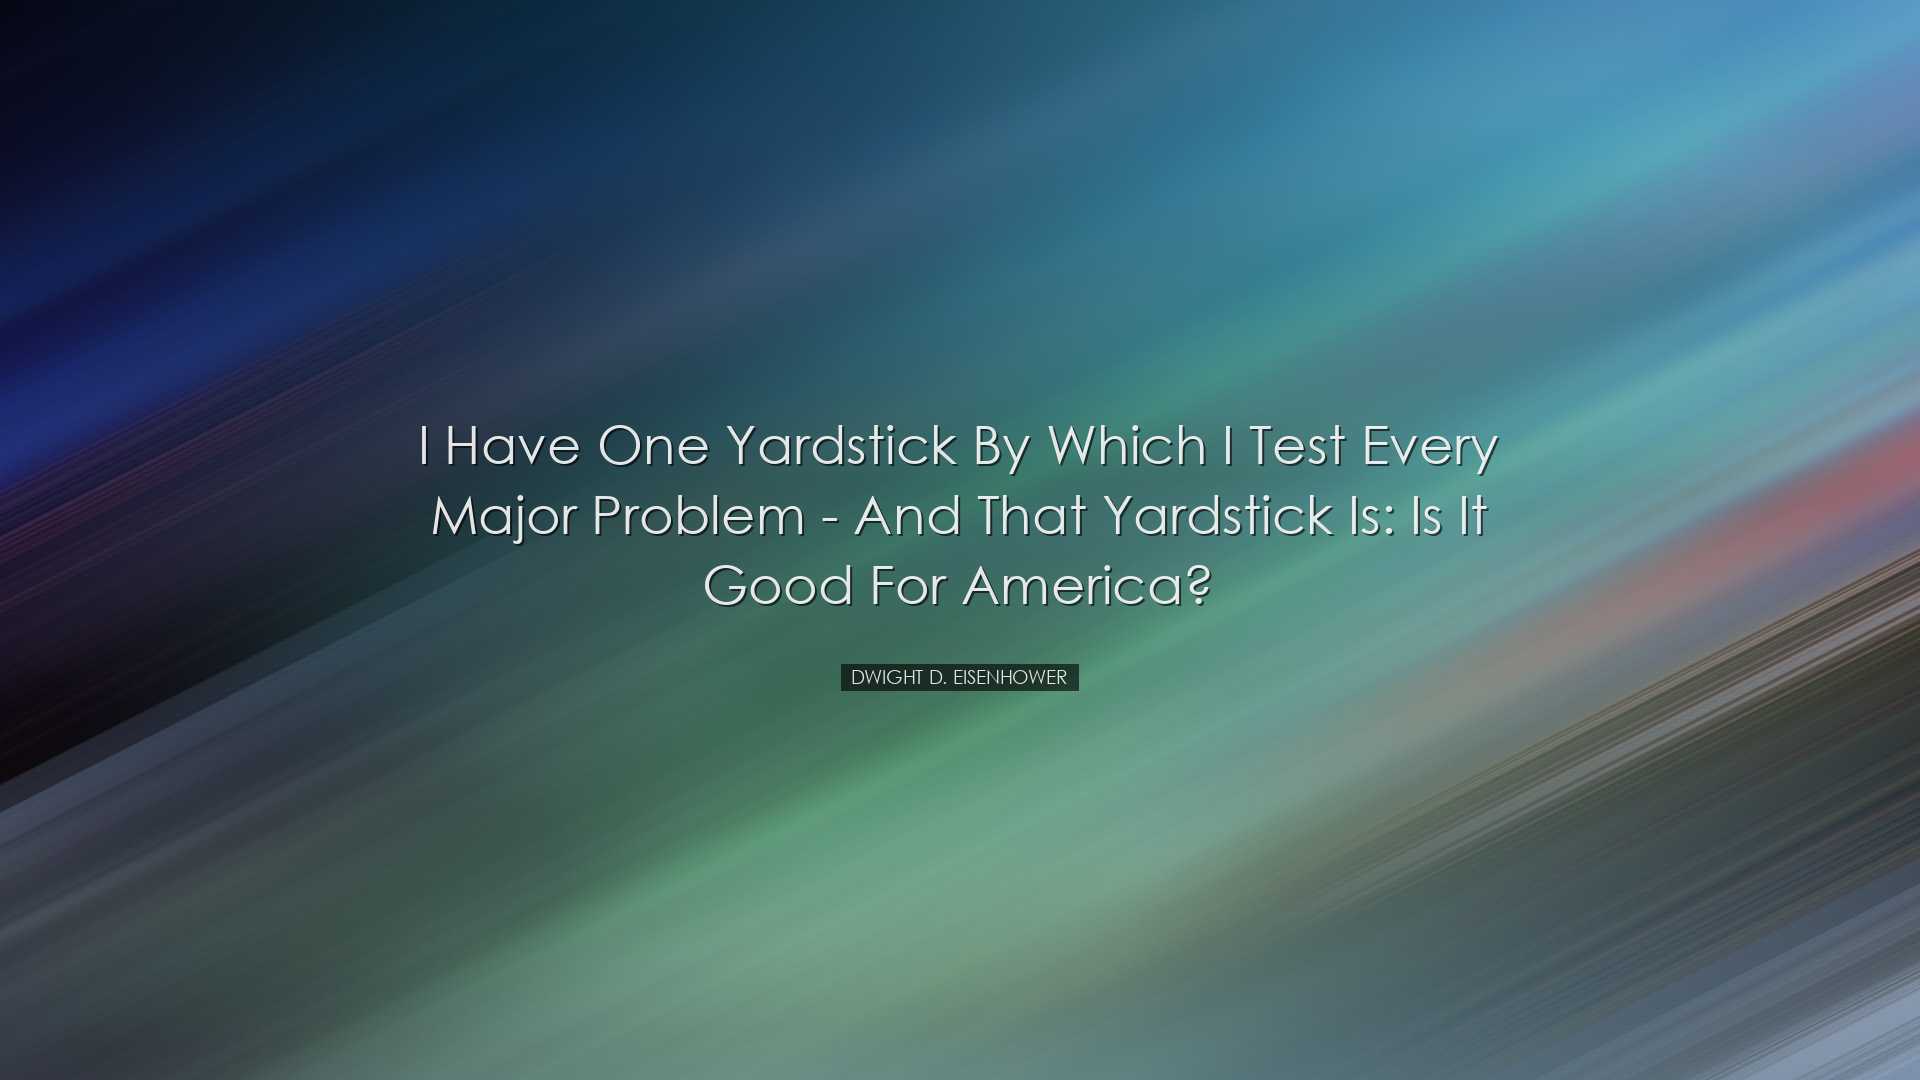 I have one yardstick by which I test every major problem - and tha